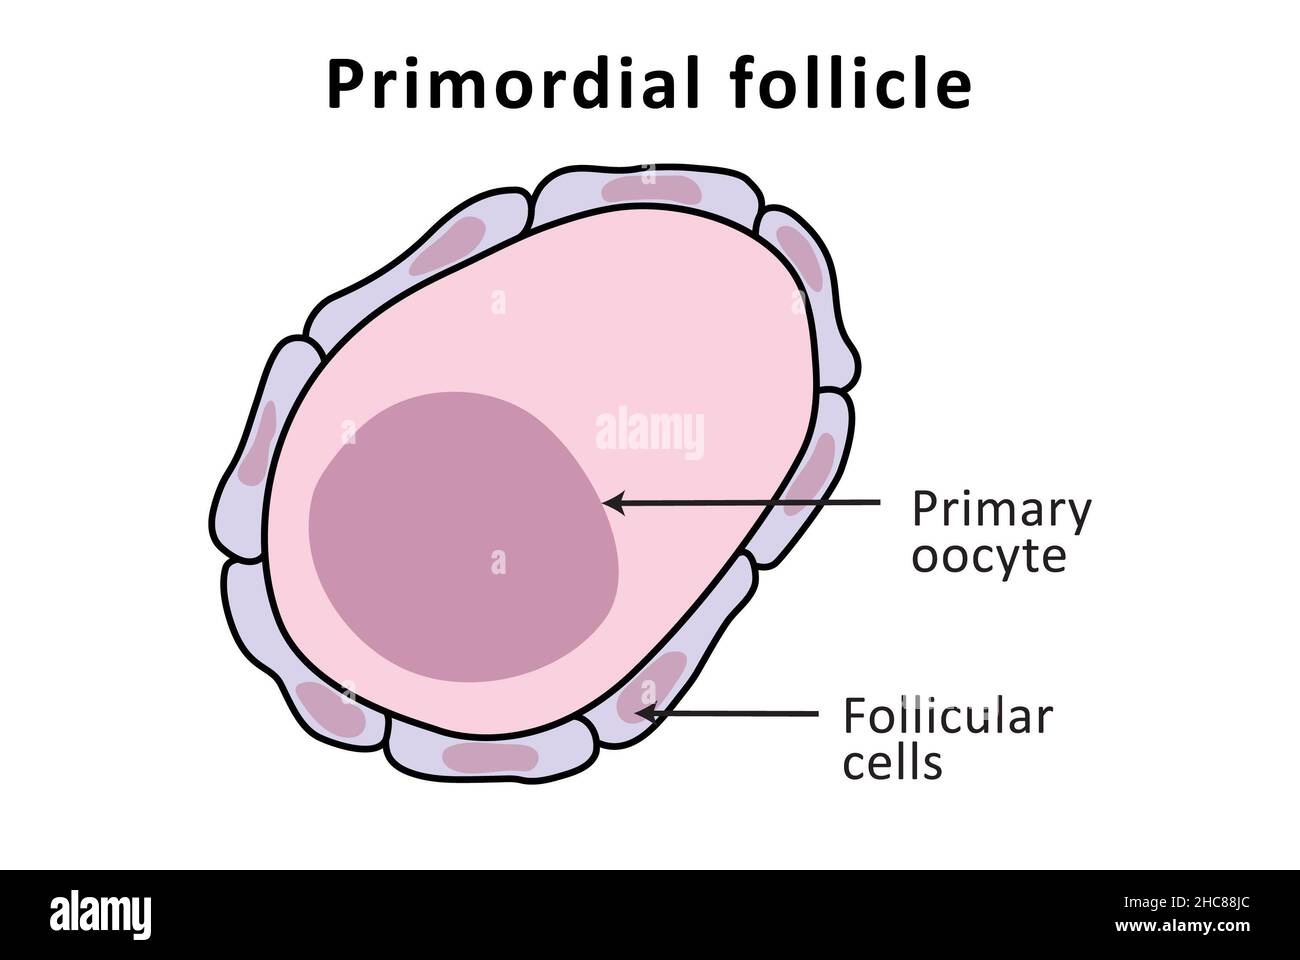 Primordial follicle, ovary structure, normal menstrual cycle, ovulation (labeled) Stock Photo